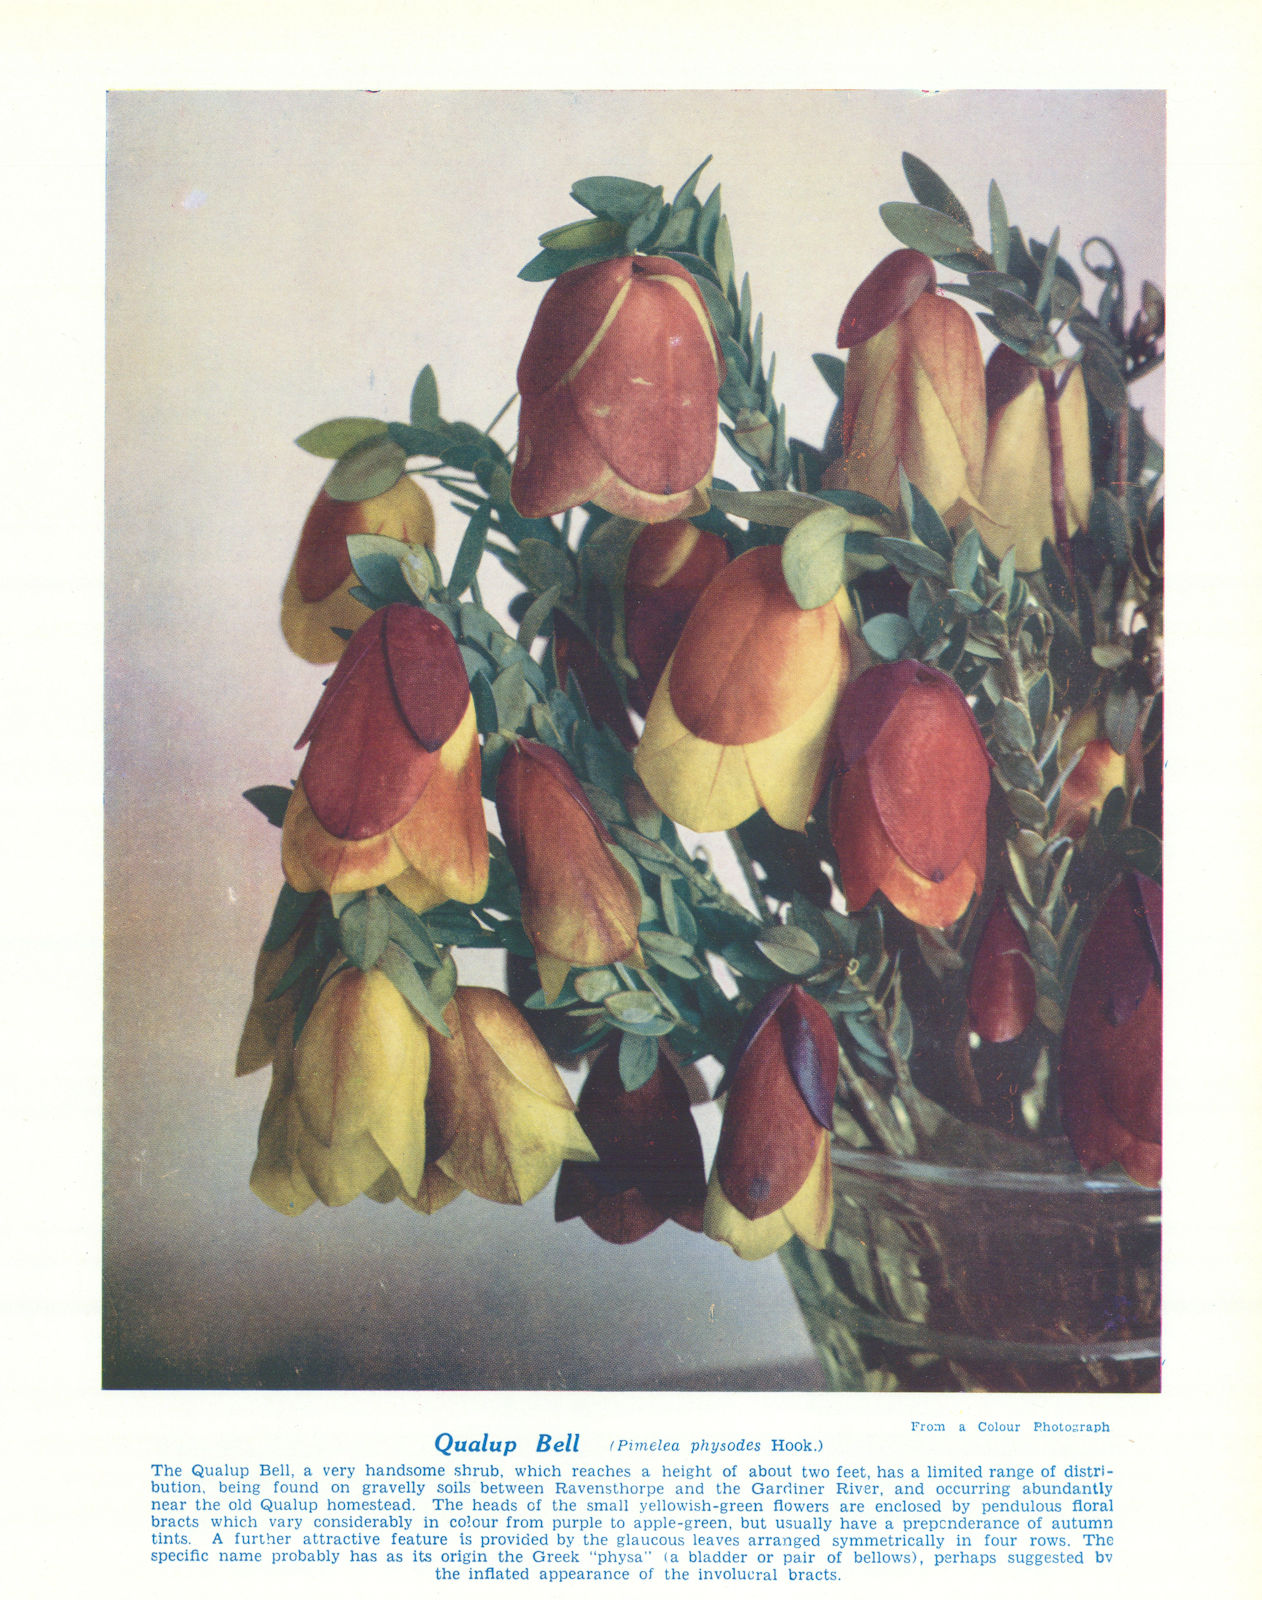 Associate Product Qualup Bell (Pimelea physodes). West Australian Wild Flowers 1950 old print